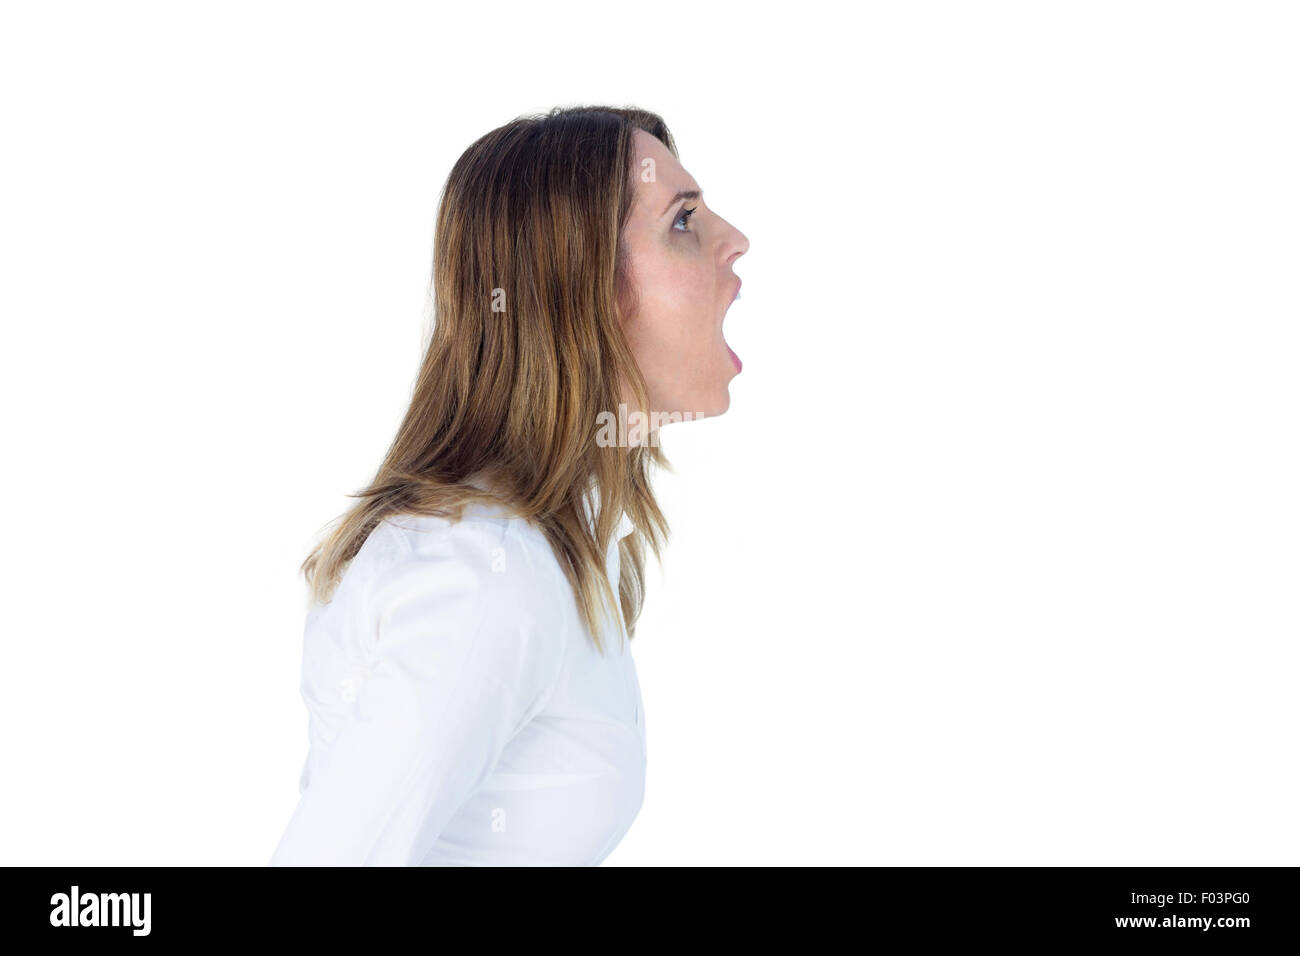 Side view of a businesswoman yelling Stock Photo